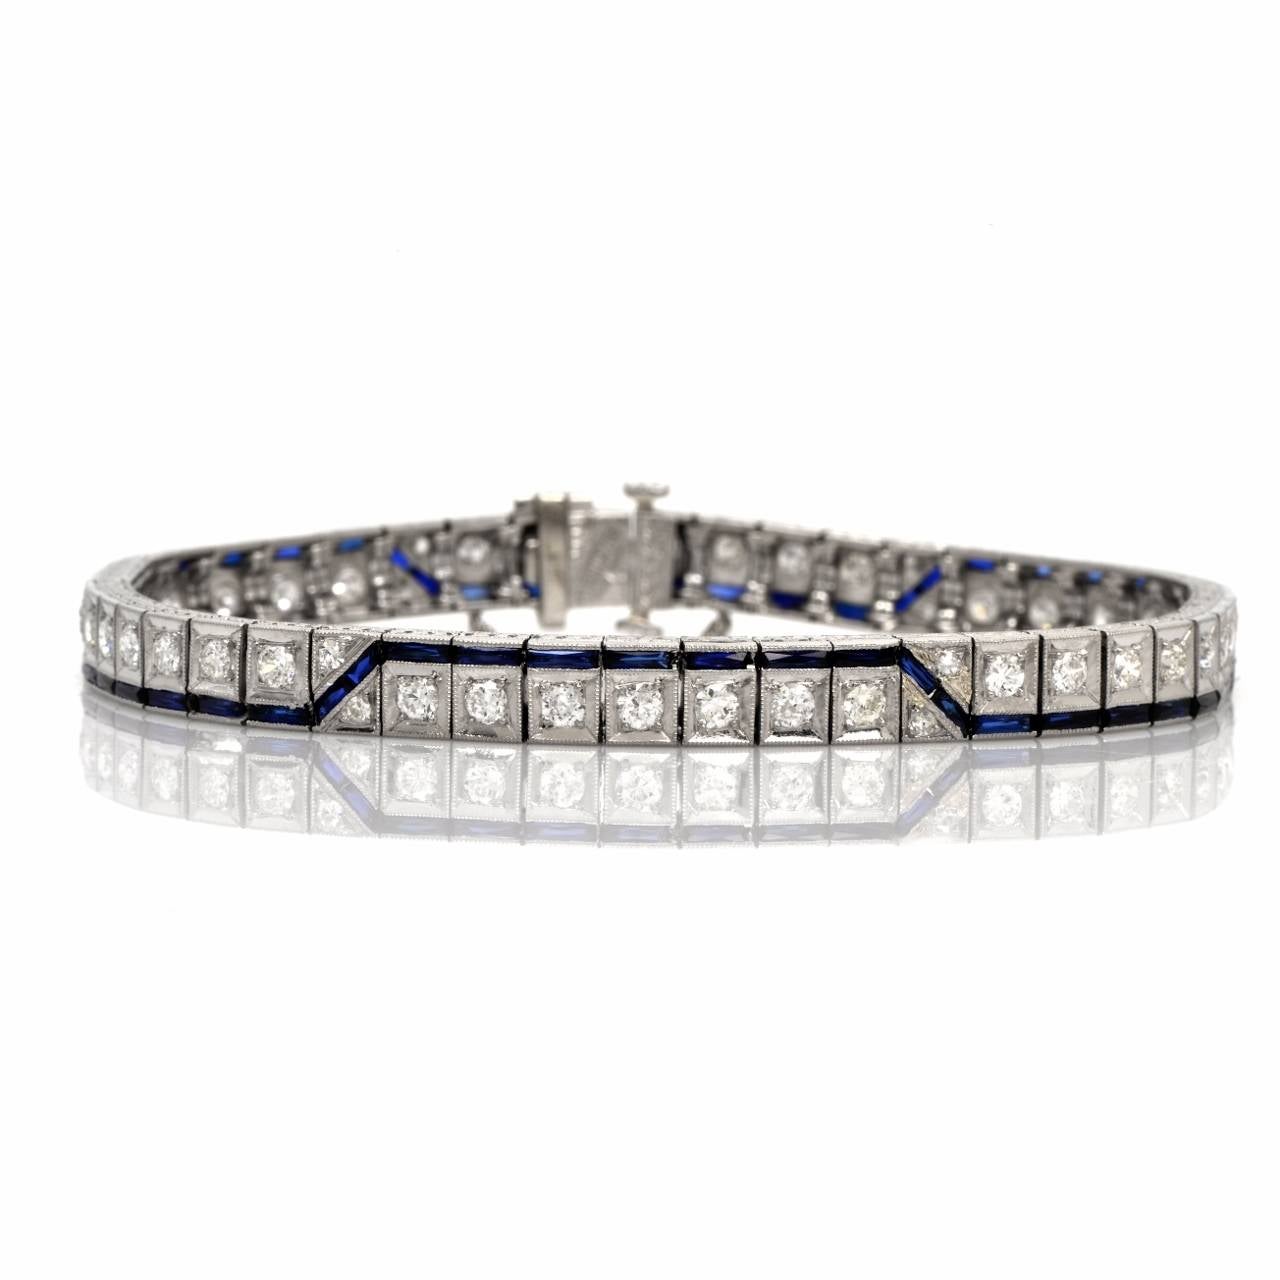 This captivating and authentic Art Deco bracelet of unmatched refinement and feminine grace  is   crafted in solid platinum, weighing 19.3 grams and measuring 7.5